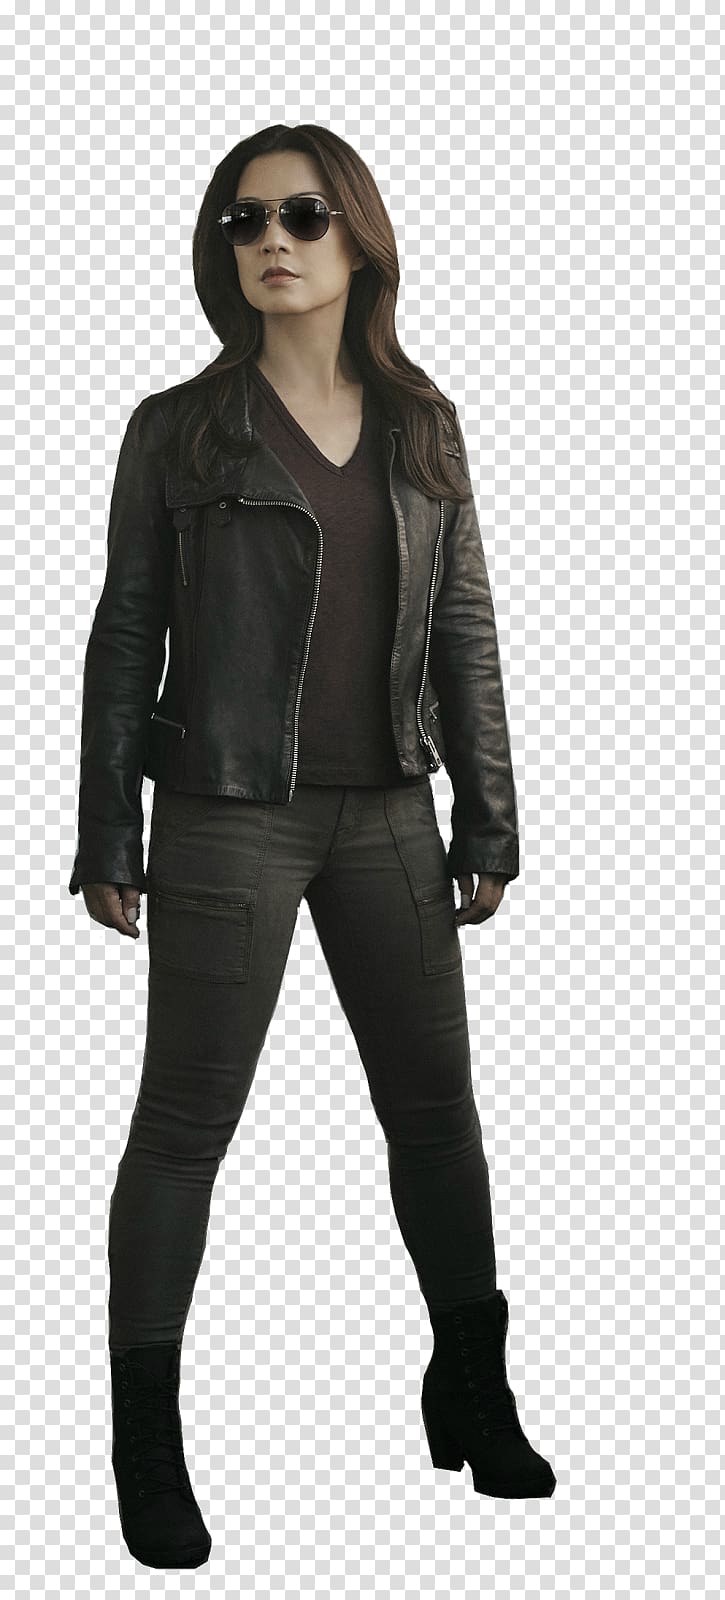 Chloe Bennet Daisy Johnson Yo-Yo Rodriguez Agents of S.H.I.E.L.D. Phil Coulson, others transparent background PNG clipart